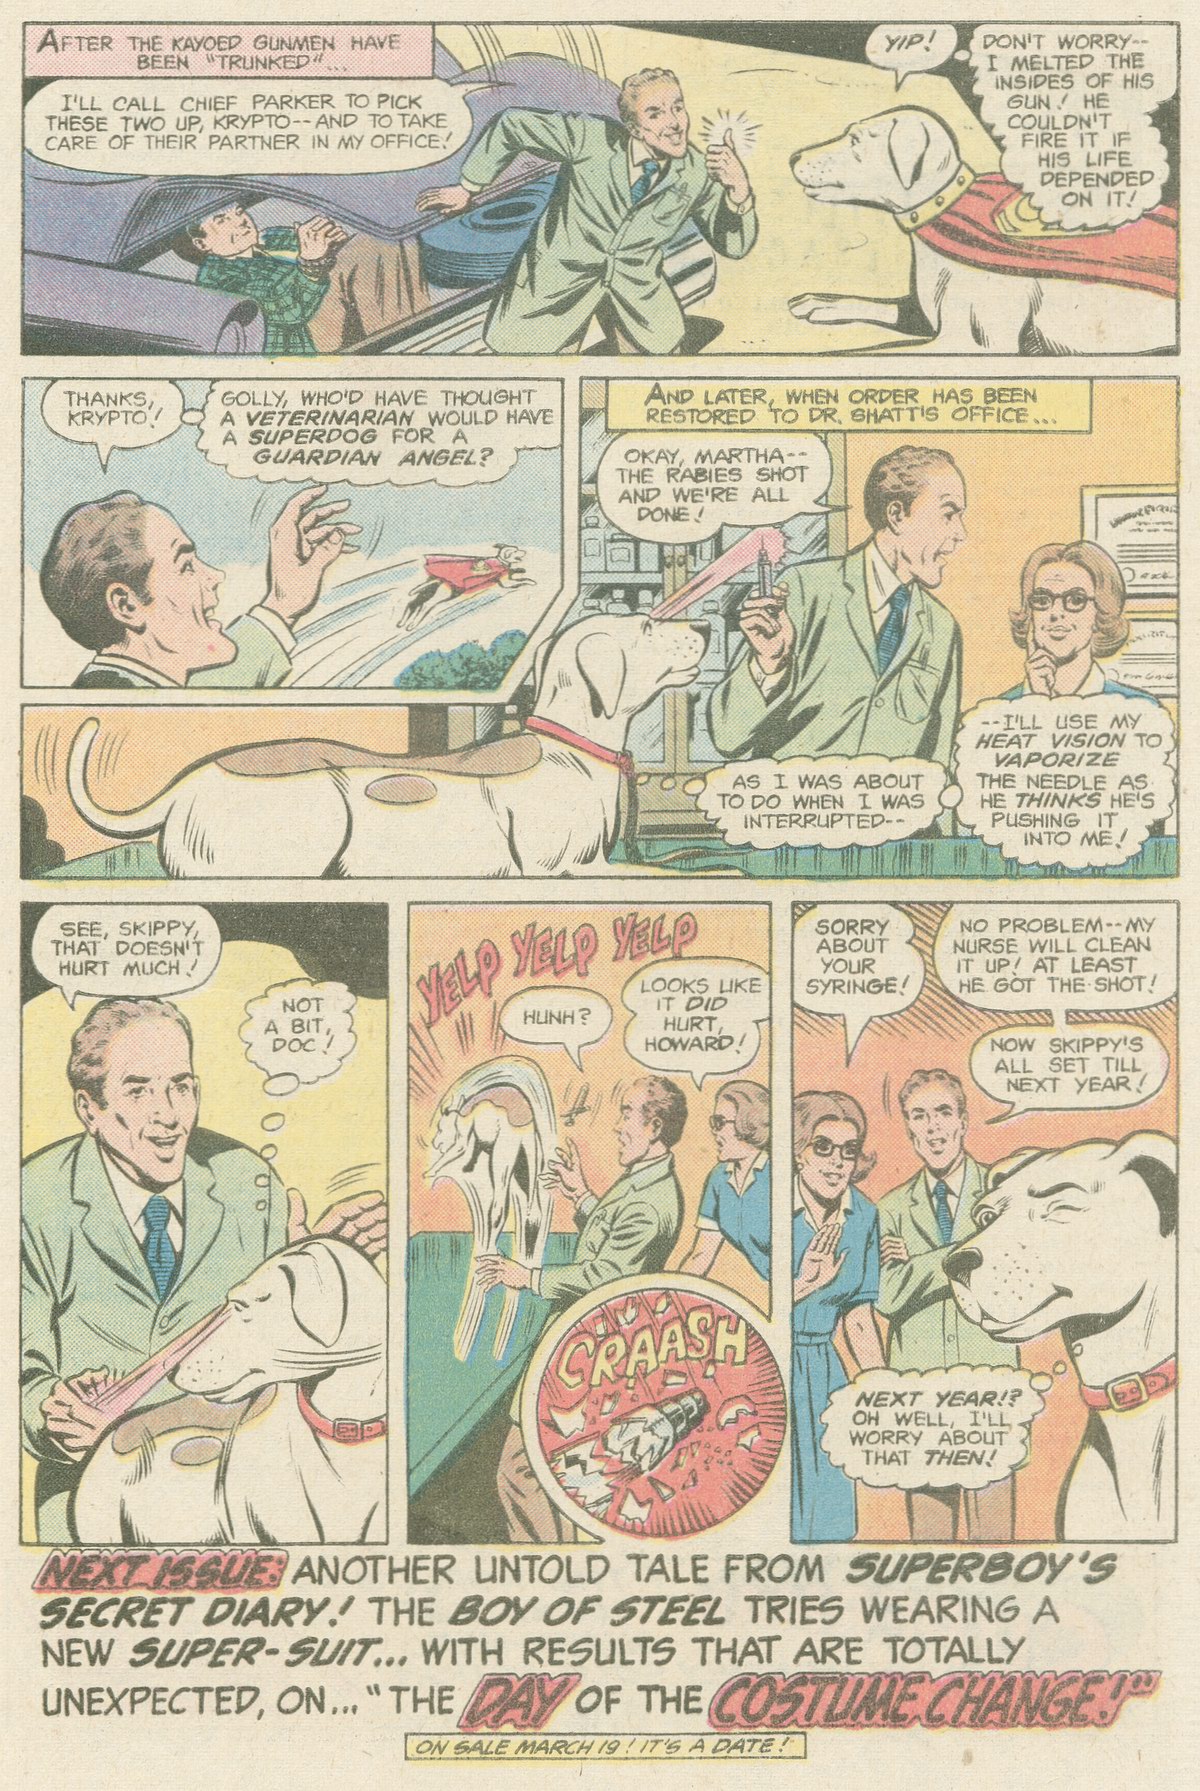 The New Adventures of Superboy 17 Page 25